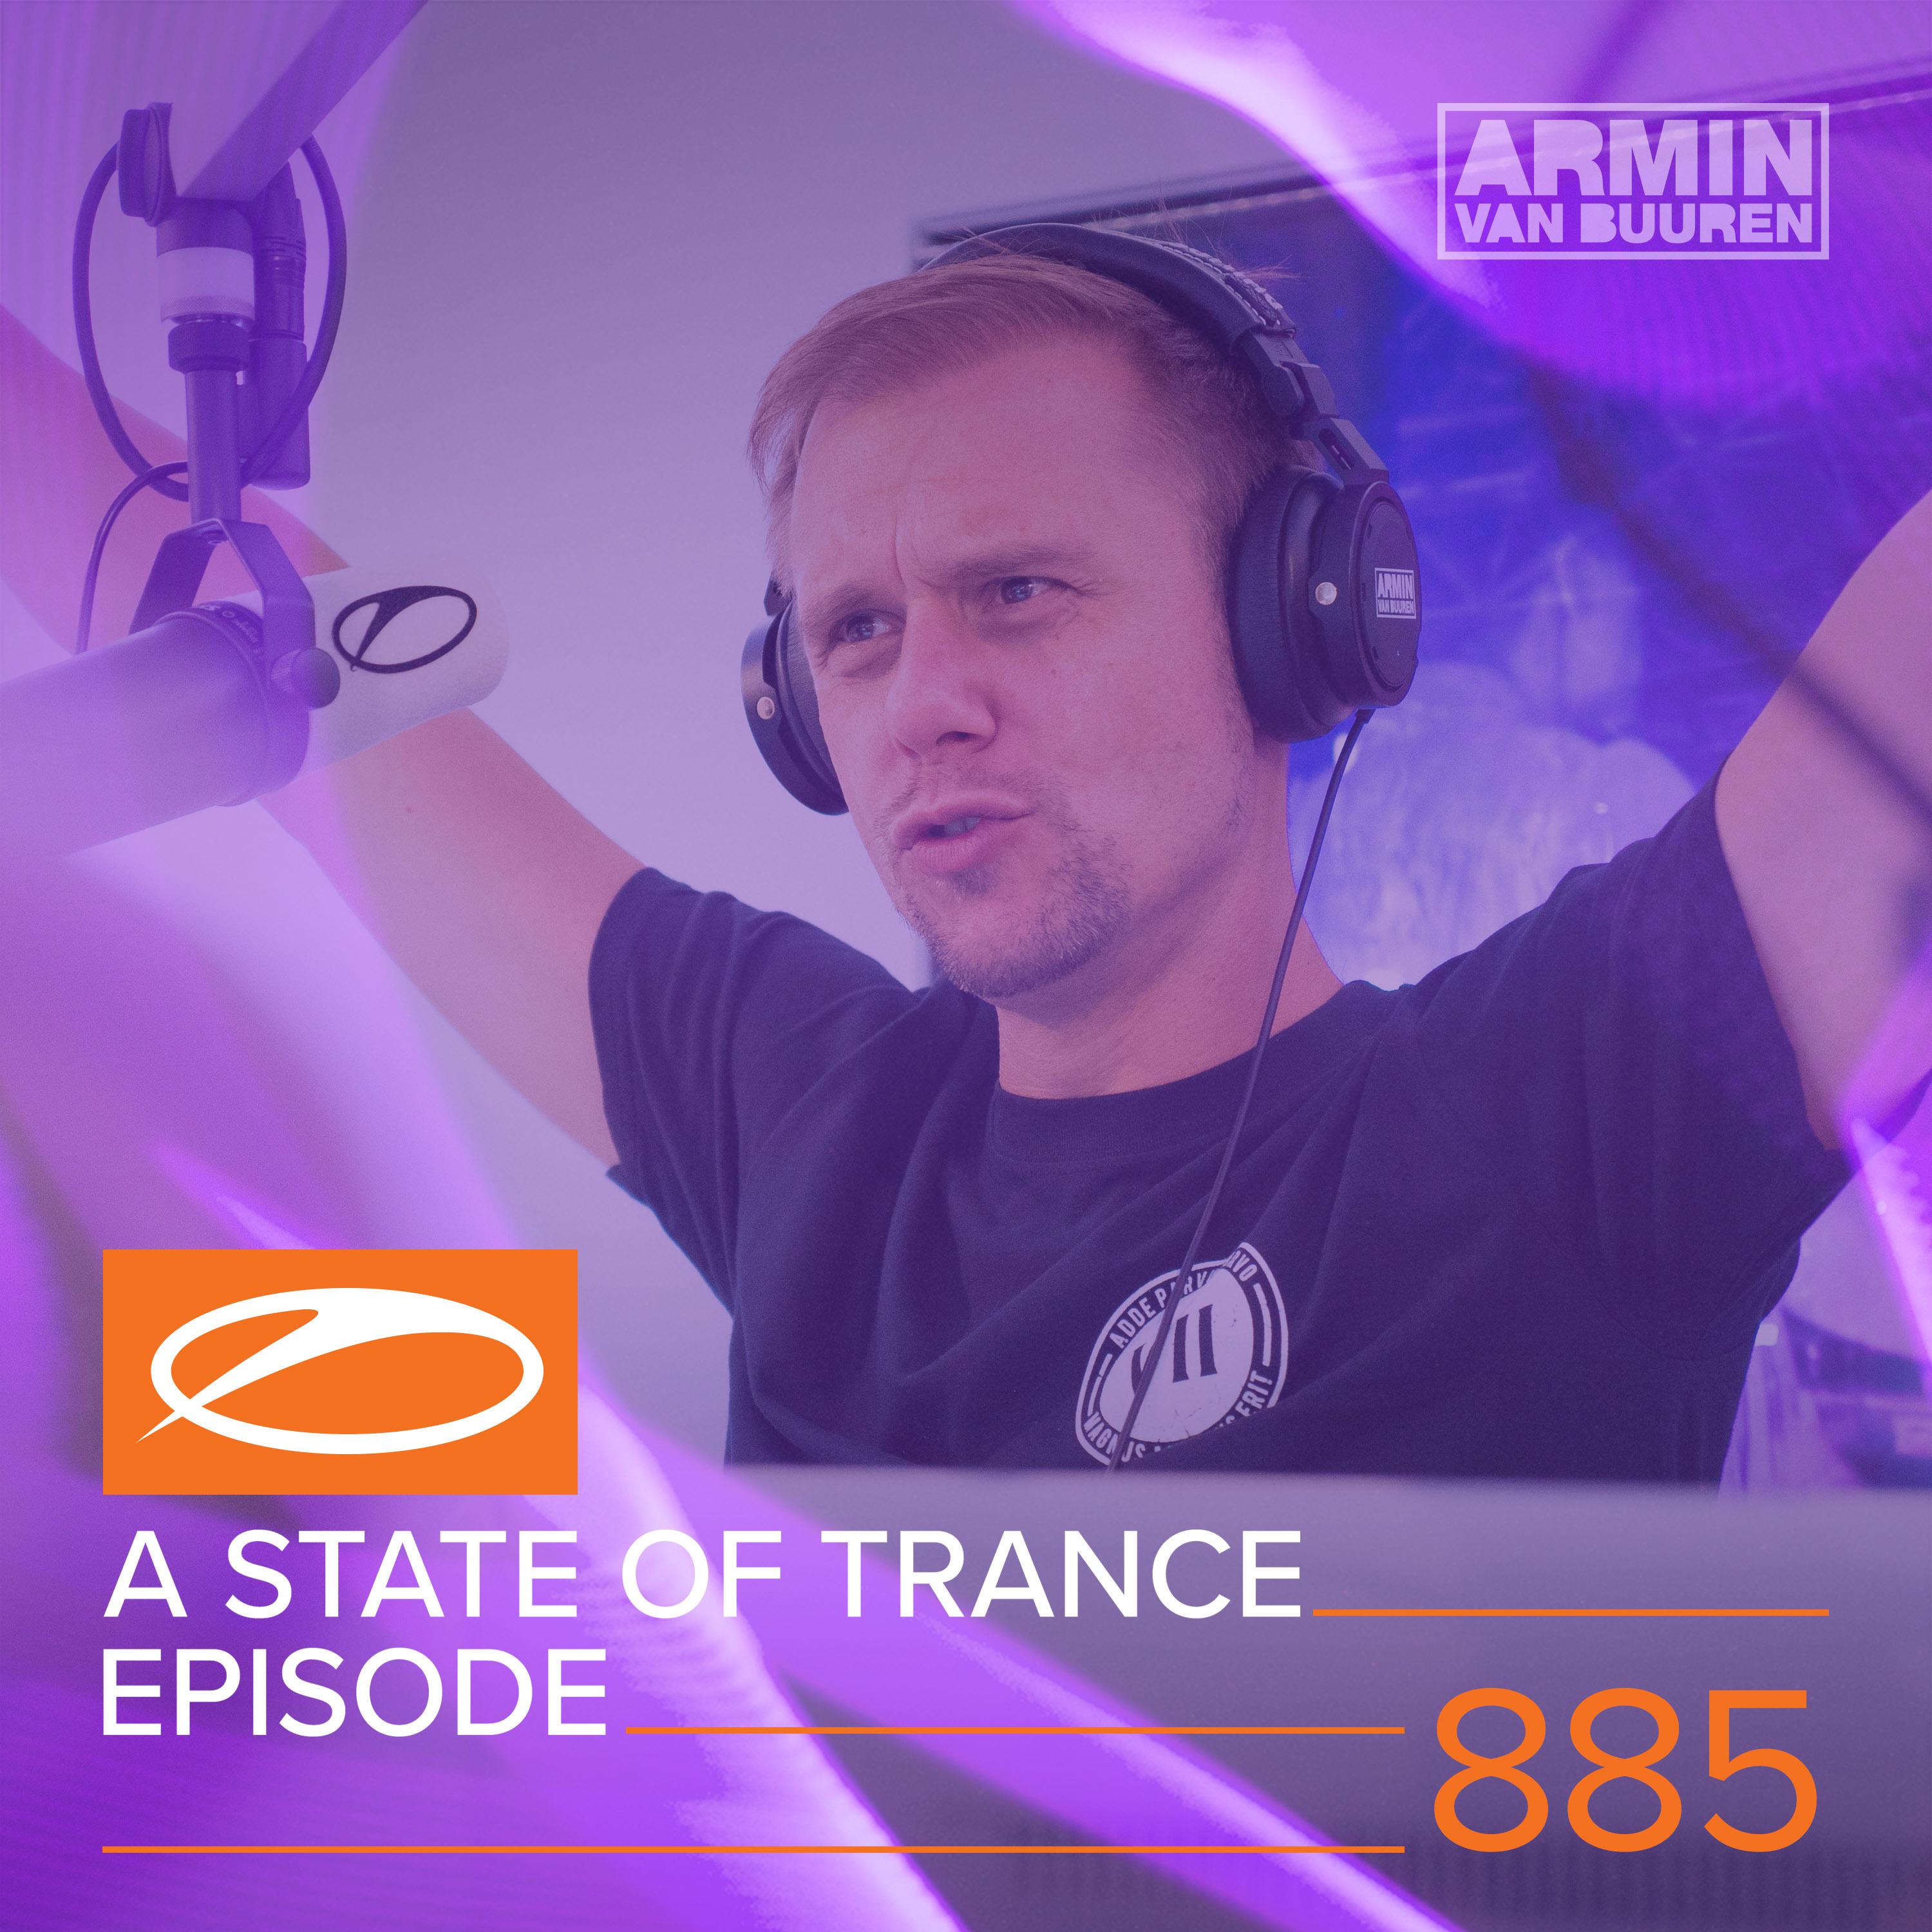 A State Of Trance (ASOT 885) (Coming Up, Pt. 3)